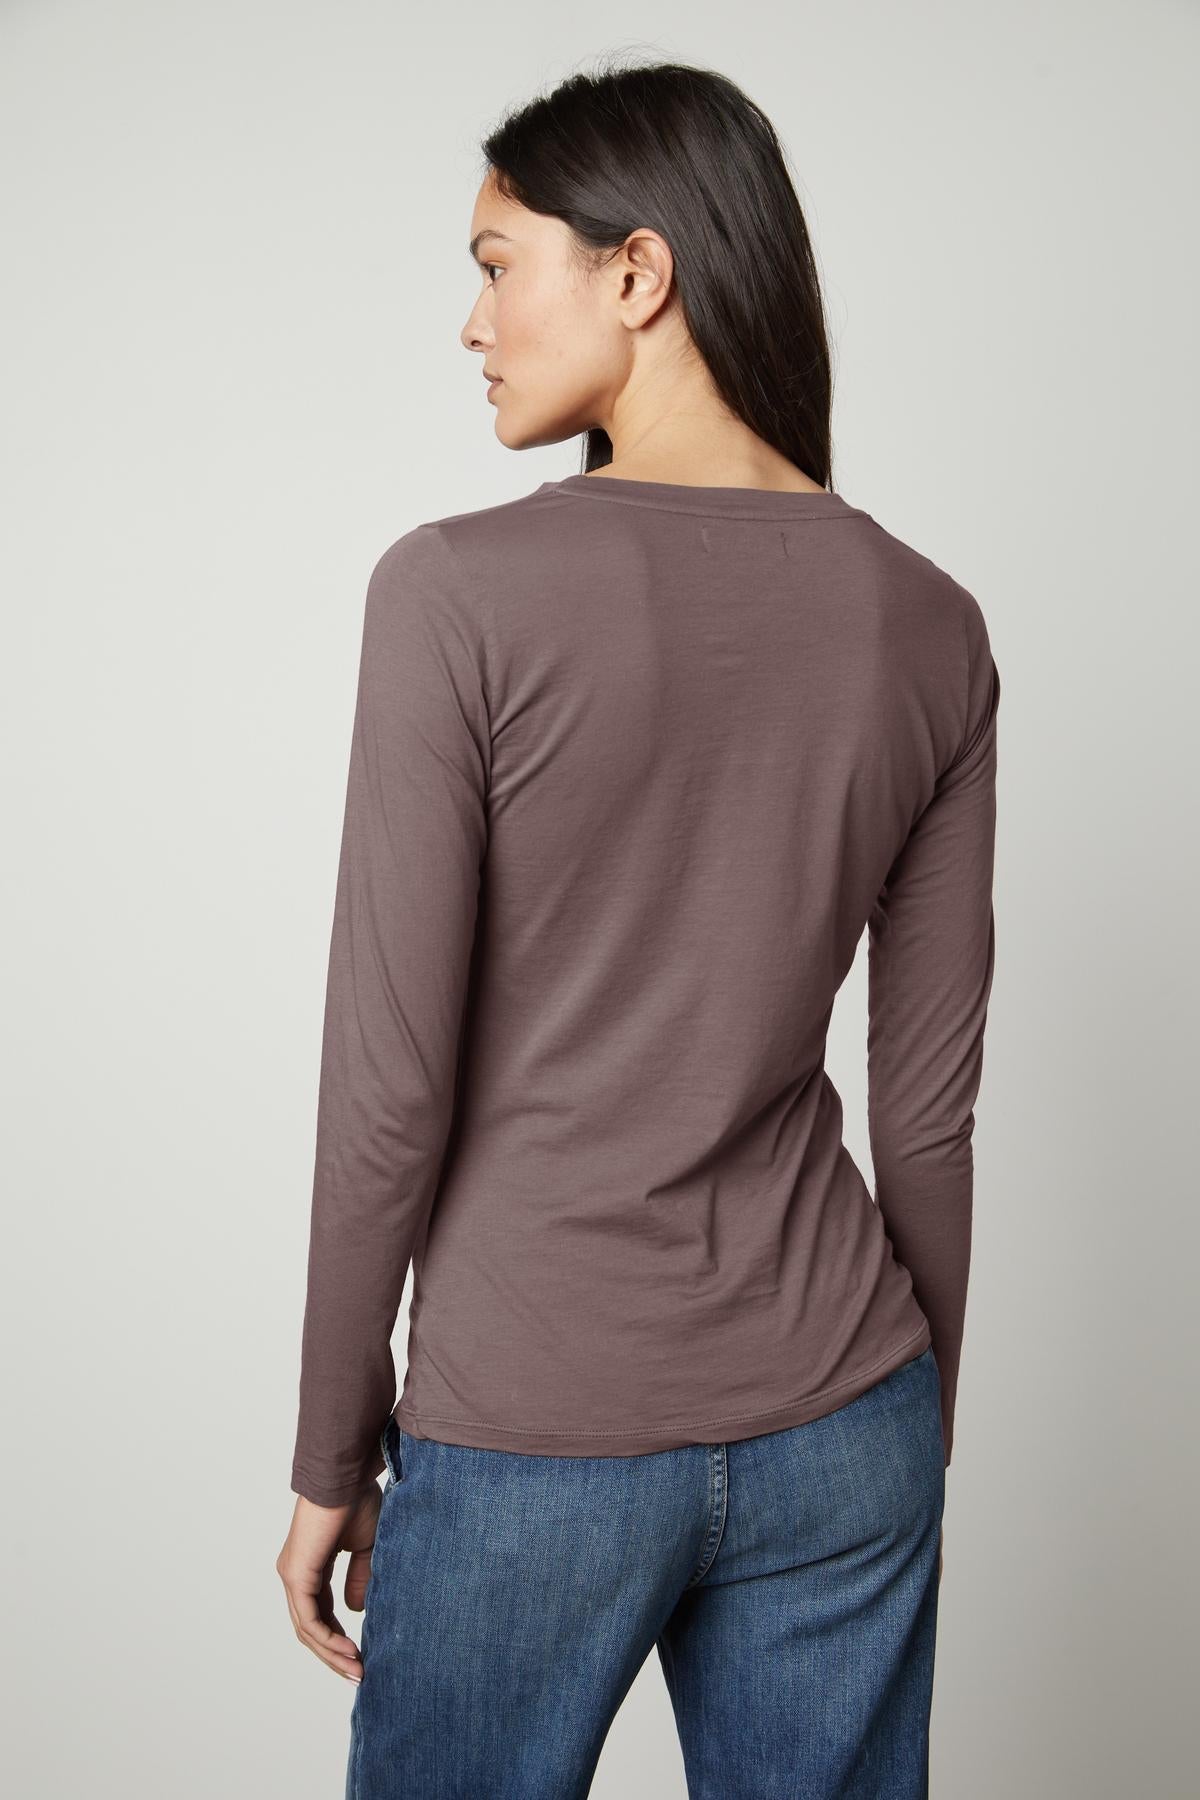 The back view of a woman wearing Velvet by Graham & Spencer jeans and the ZOFINA GAUZY WHISPER FITTED CREW NECK TEE in a universally flattering cut.-36594705367233